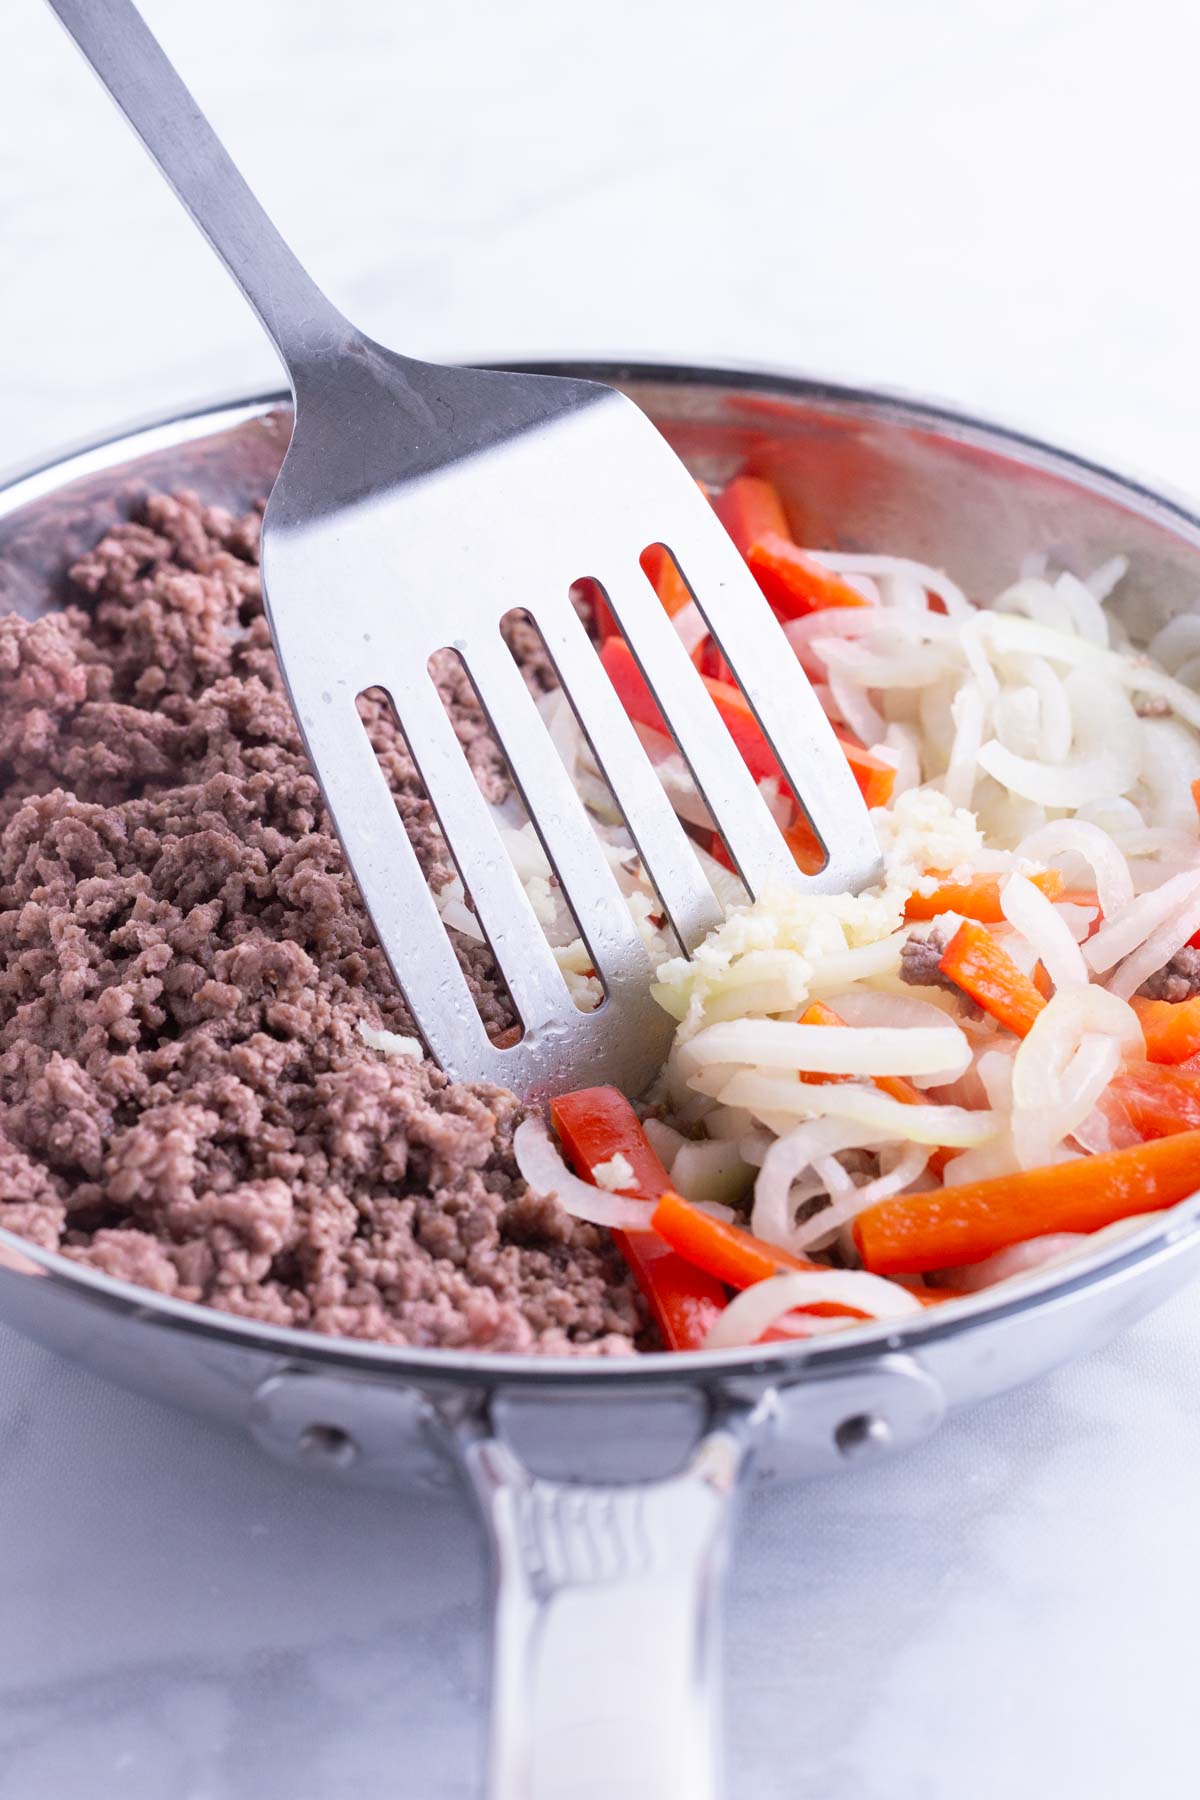 Onion and bell peppers are added to the beef in the skillet.